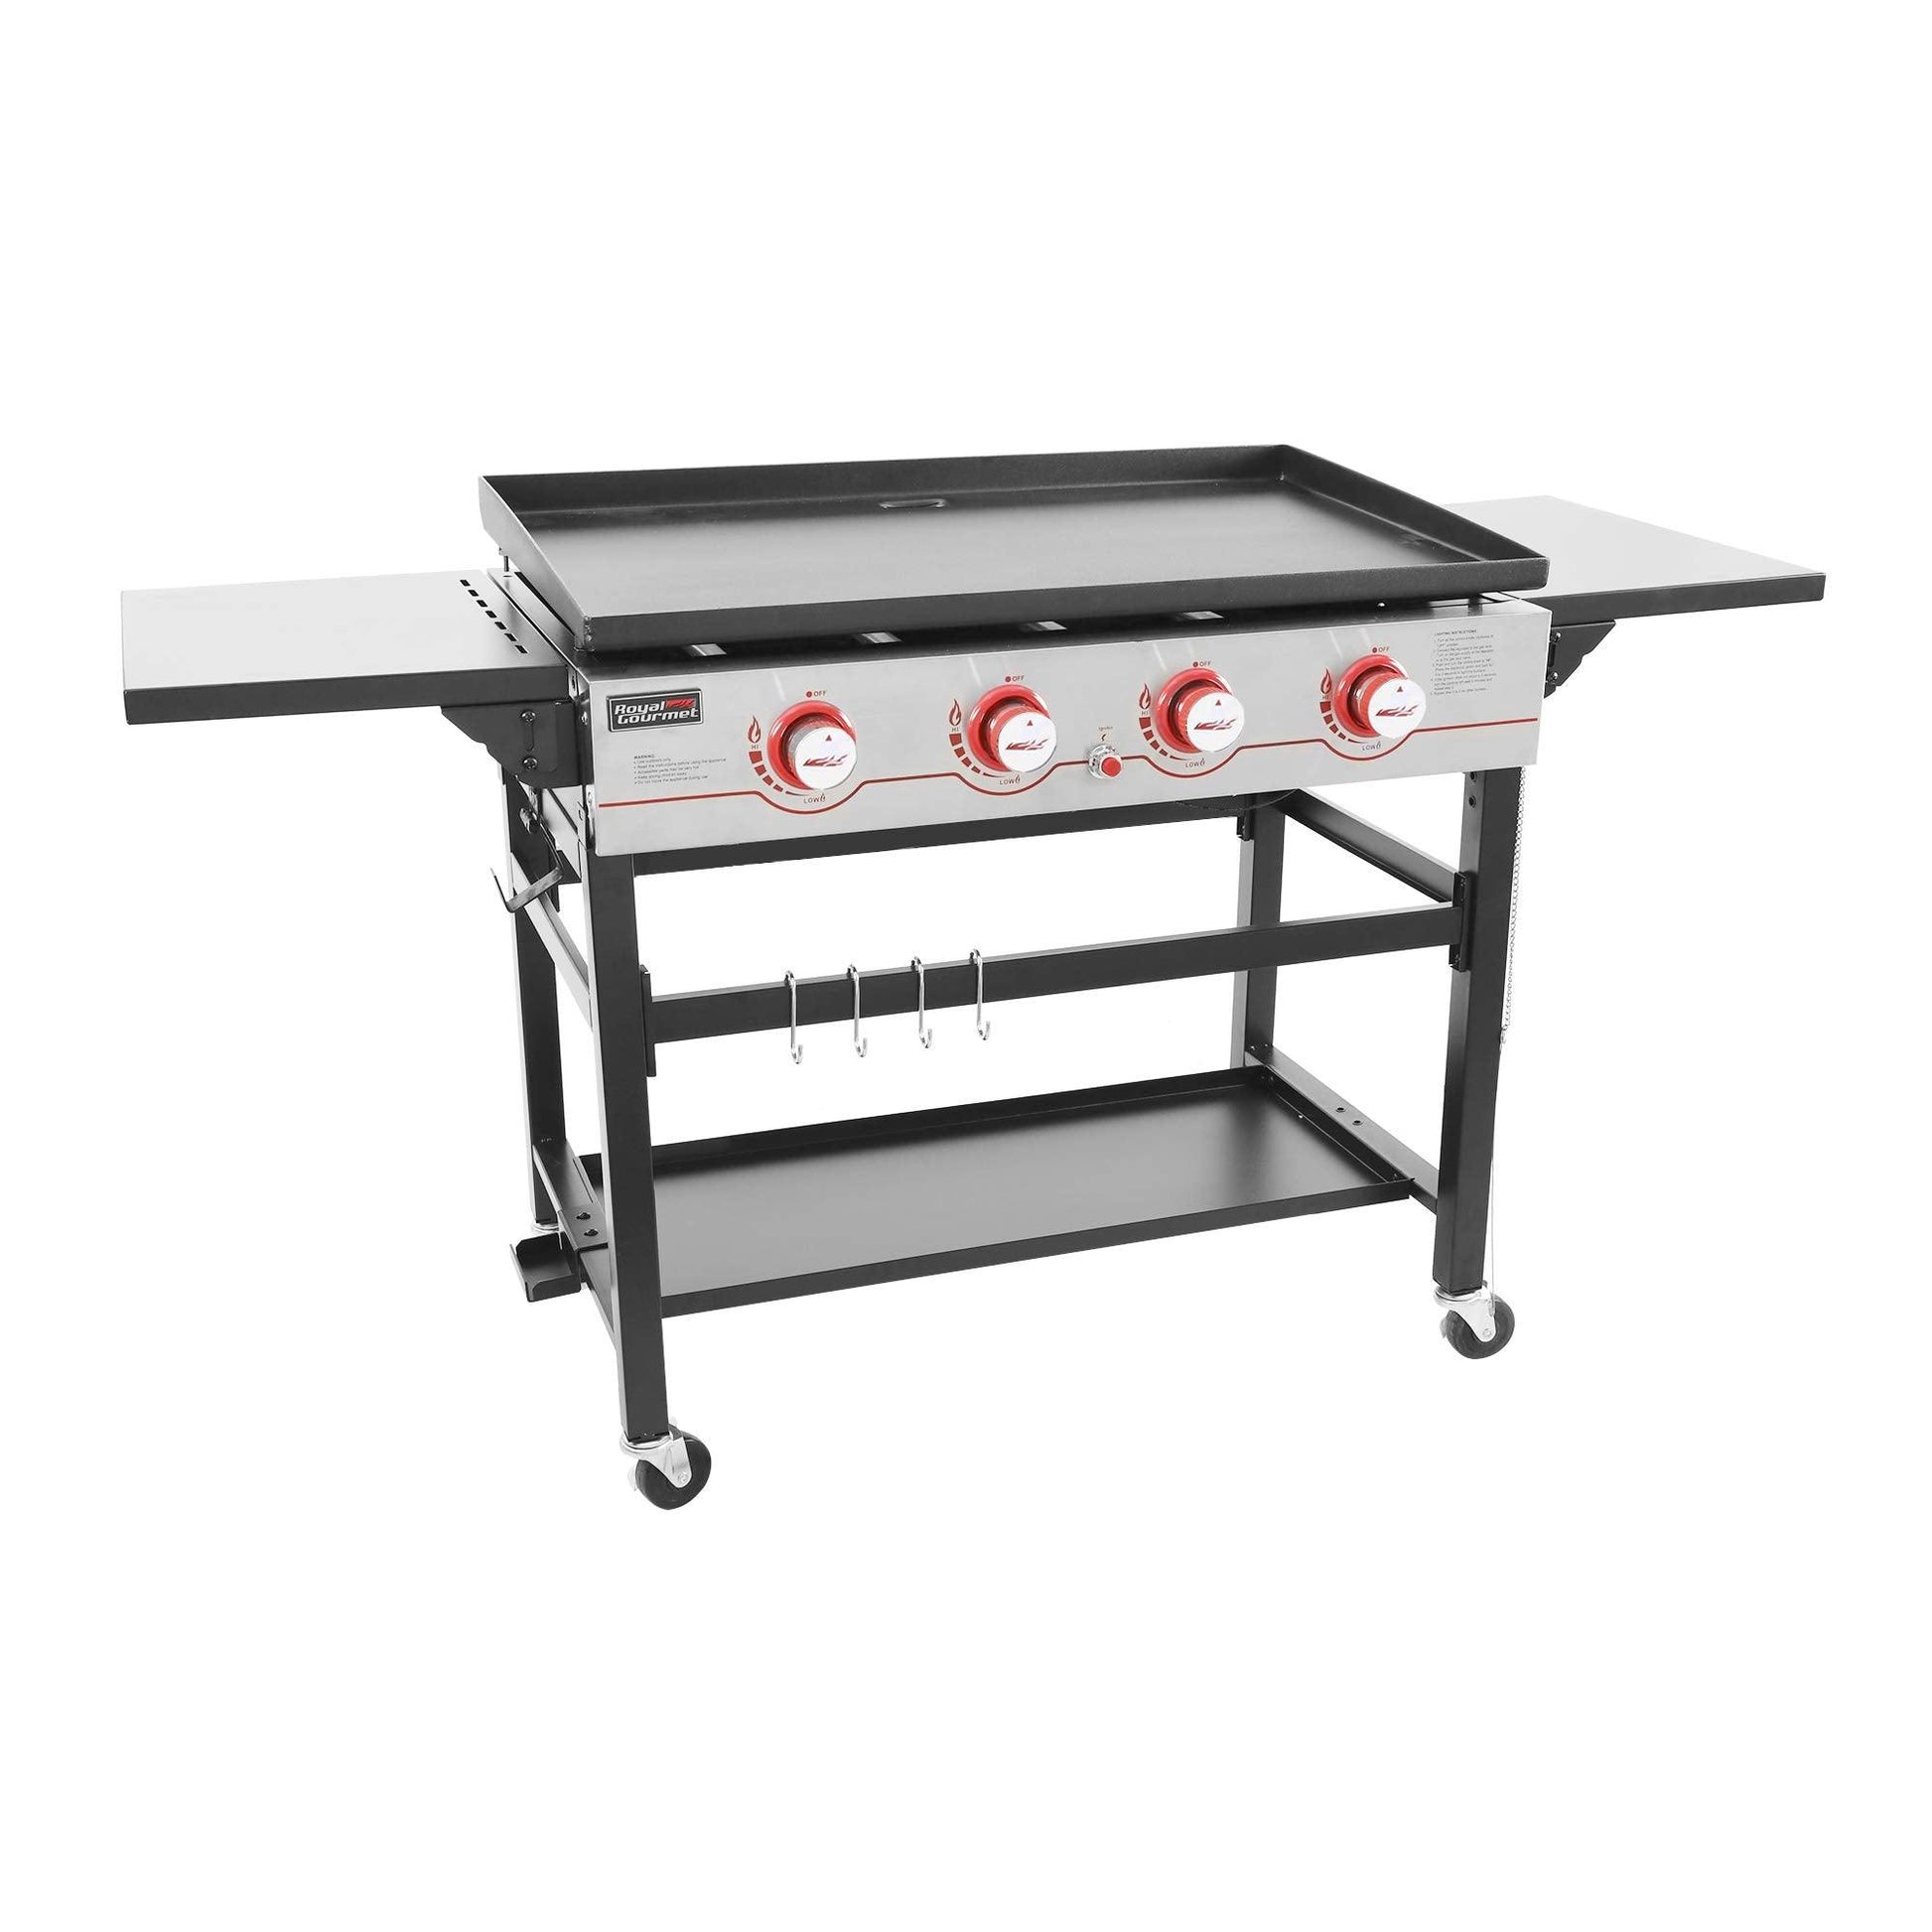 Royal Gourmet GB4000 36-inch 4-Burner Flat Top Propane Gas Grill Griddle, for BBQ, Camping, Red - CookCave